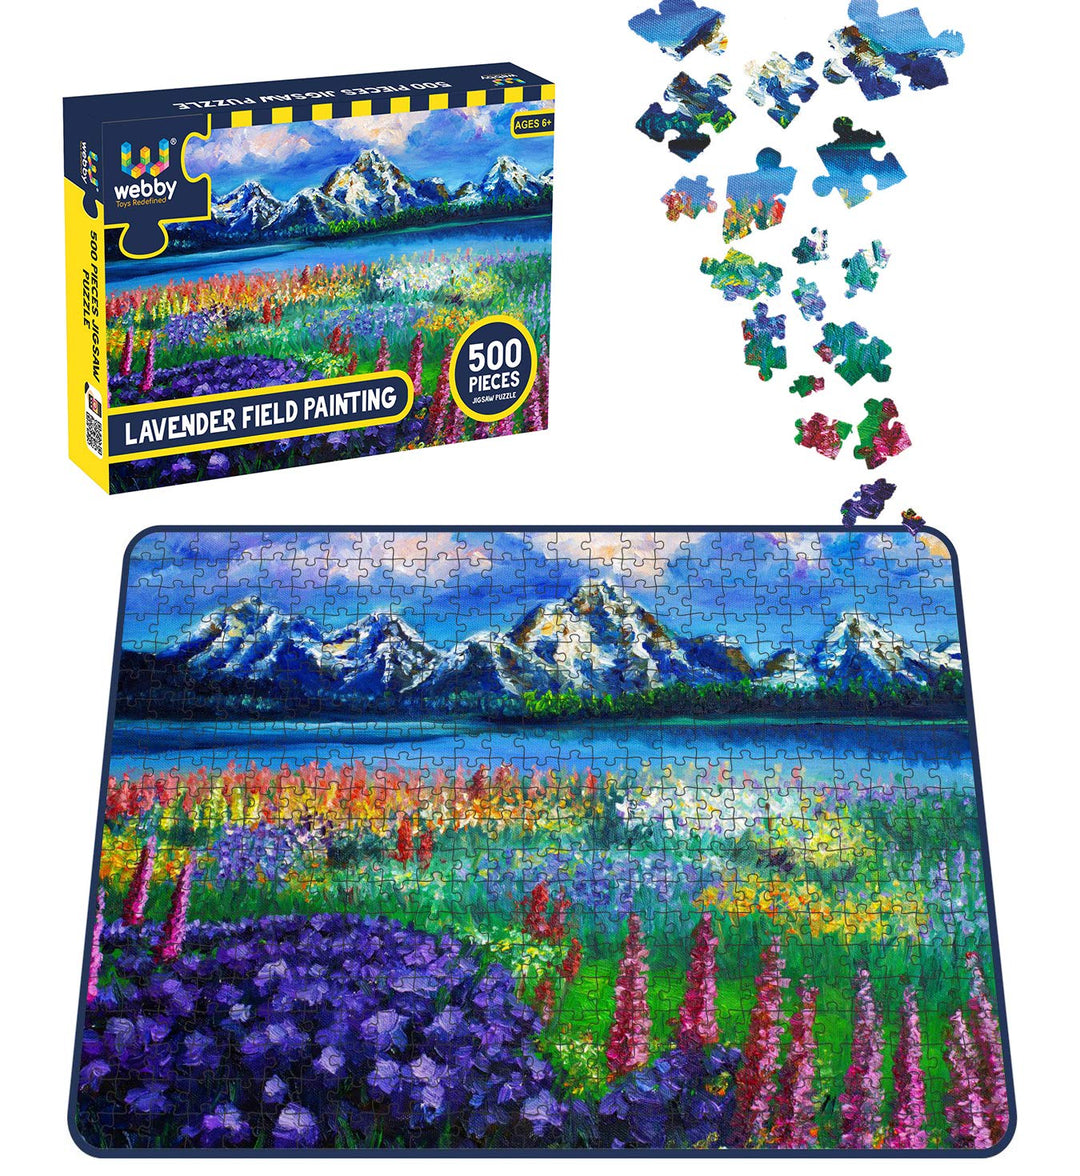 Webby Lavender Field Painting Wooden Jigsaw Puzzle, 500 pieces